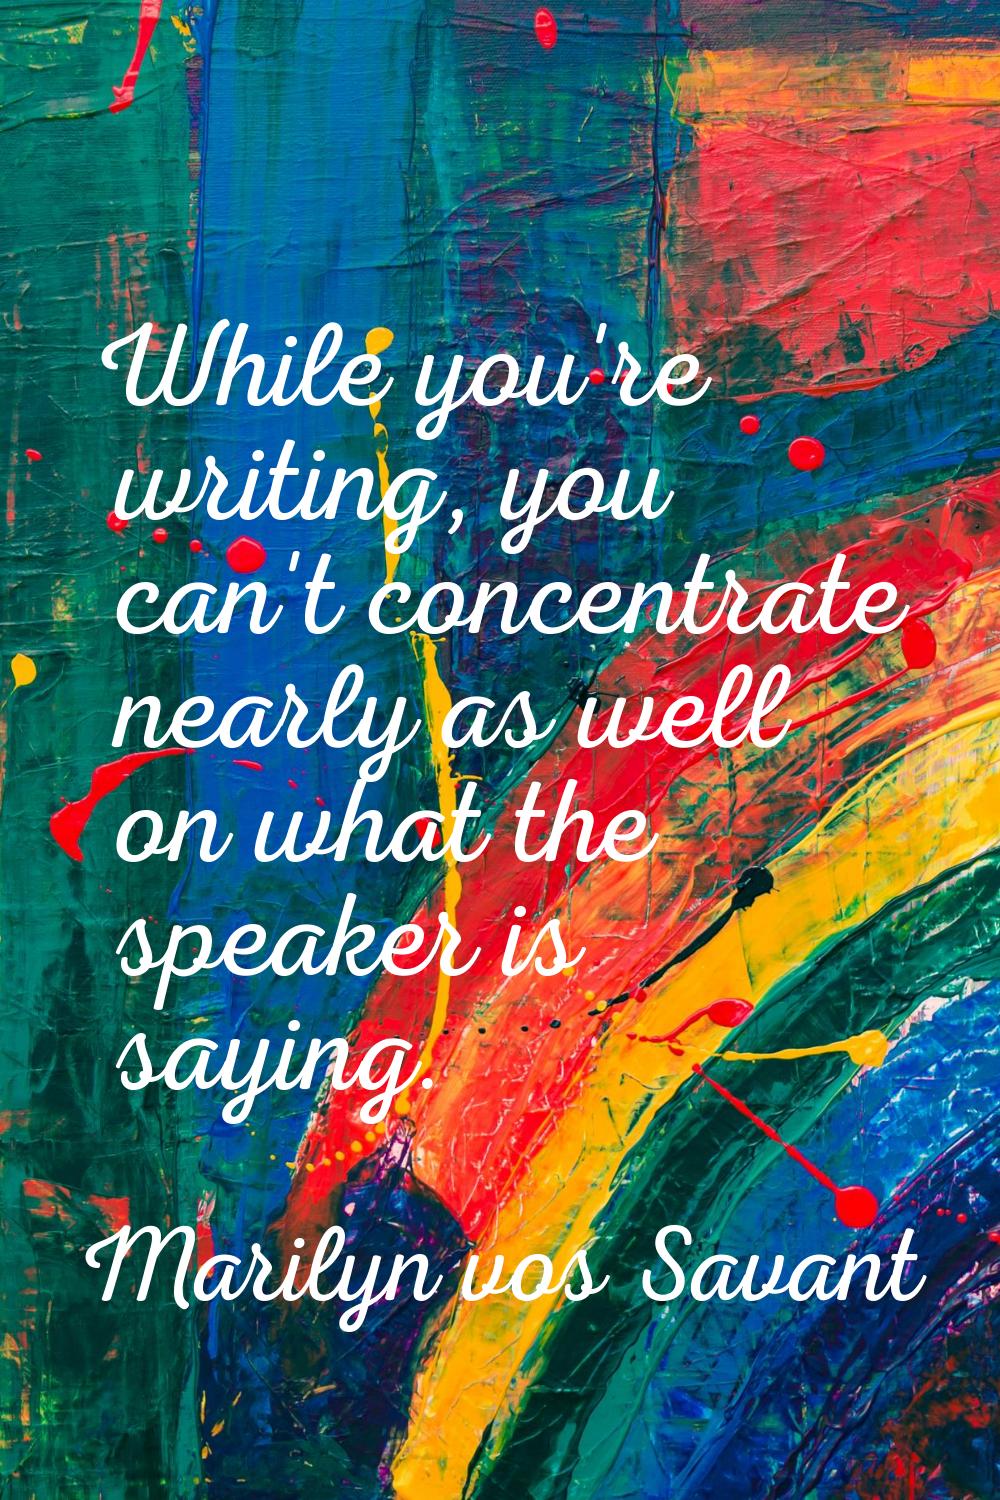 While you're writing, you can't concentrate nearly as well on what the speaker is saying.